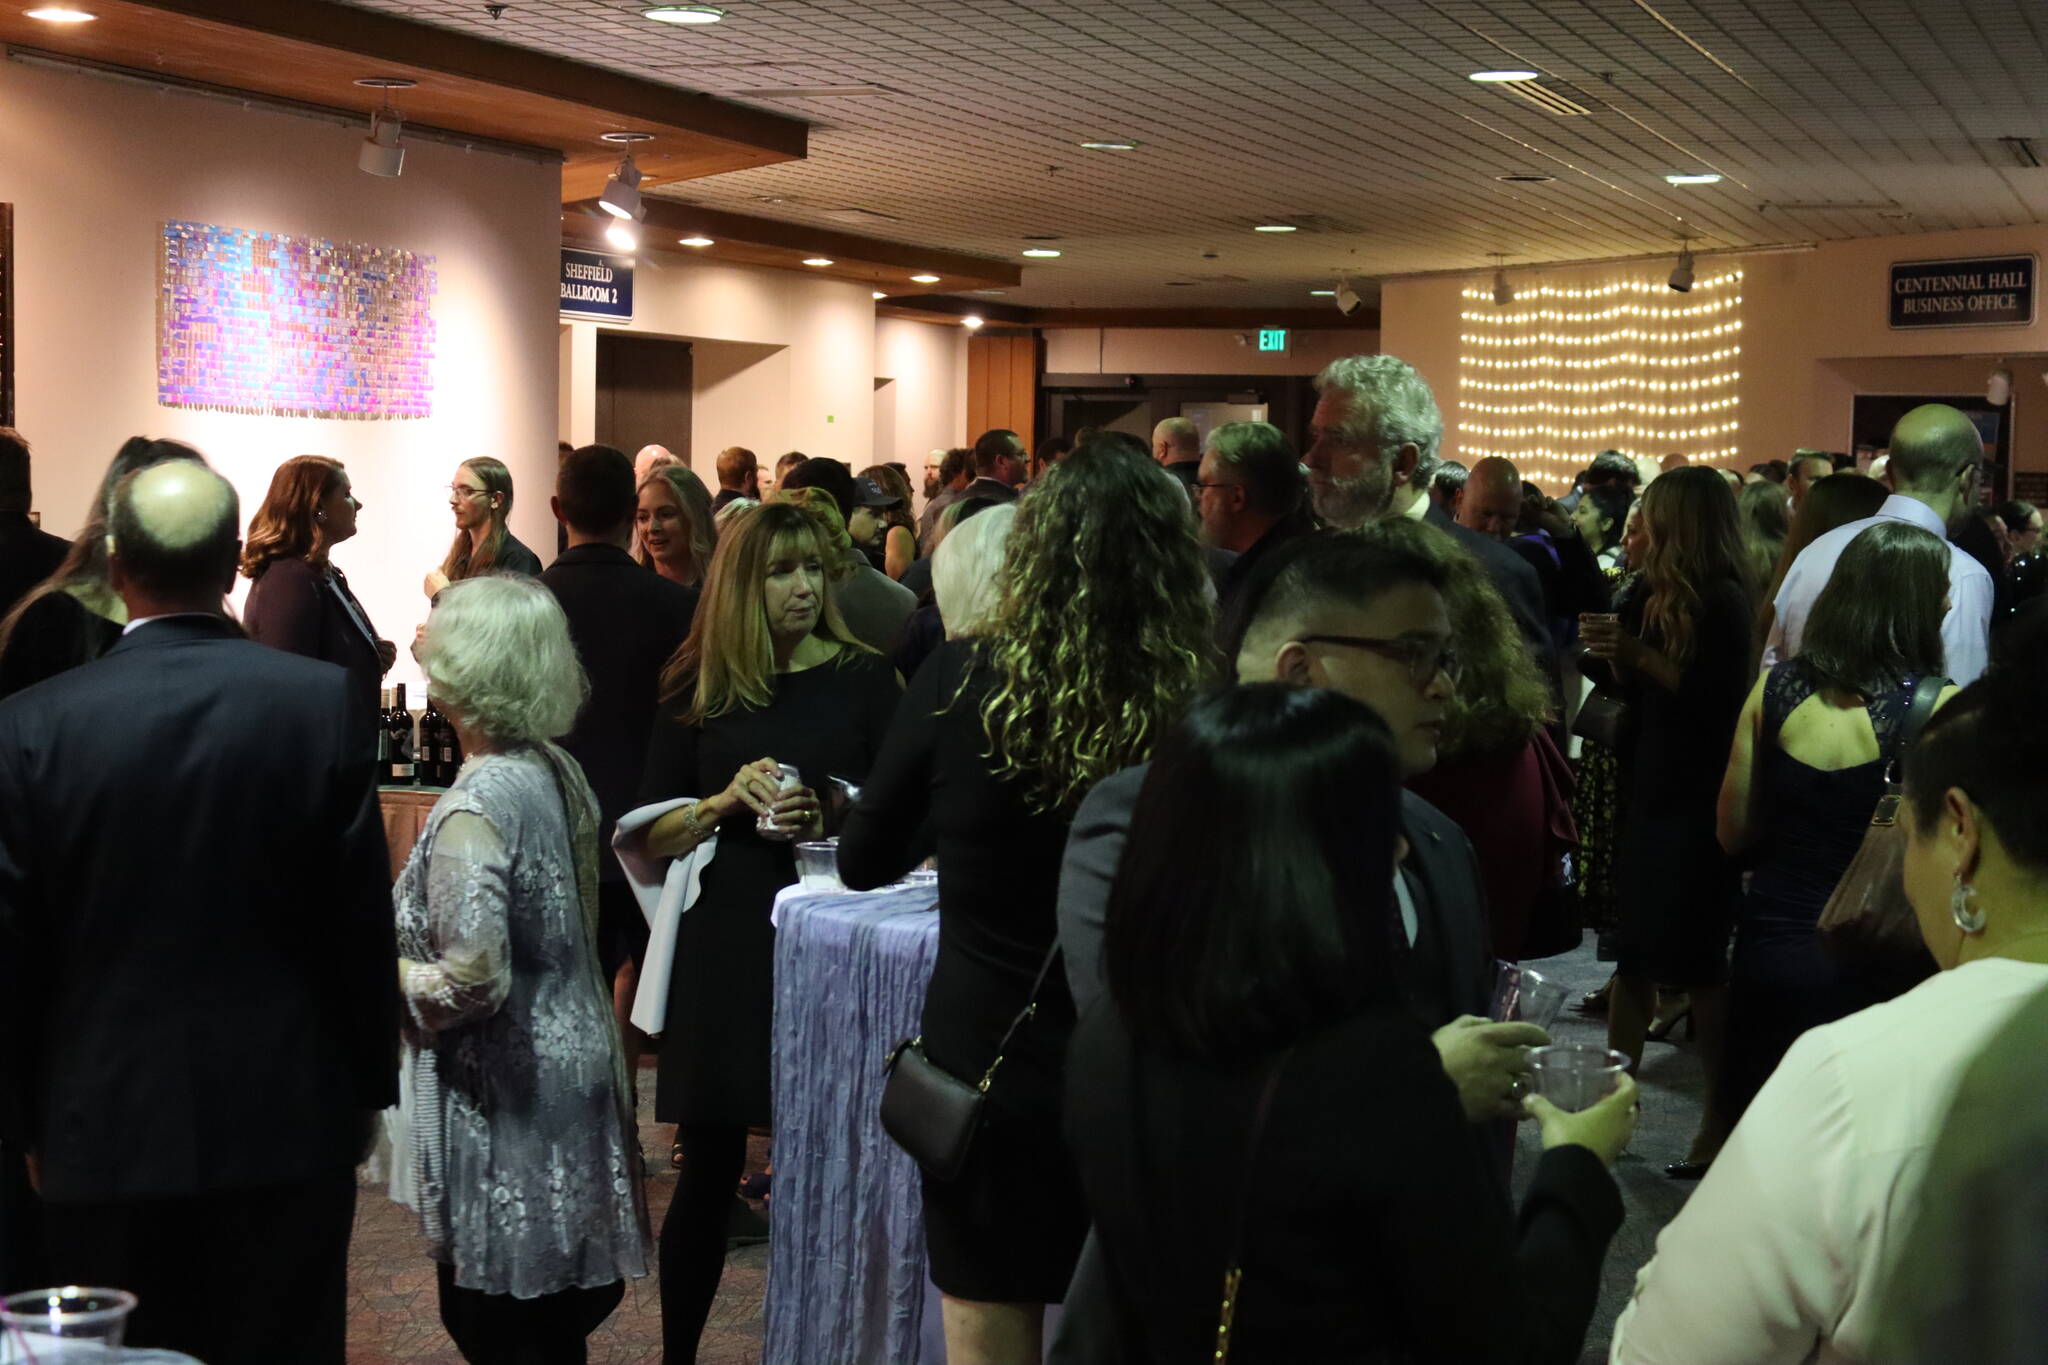 Meredith Jordan/ Juneau Empire
Attendees gather at the Greater Juneau Chamber of Commerce annual gala, with this year’s theme being “Under the Sea: A Celebration of Ocean Industries,” at Centennial Hall on Saturday night.